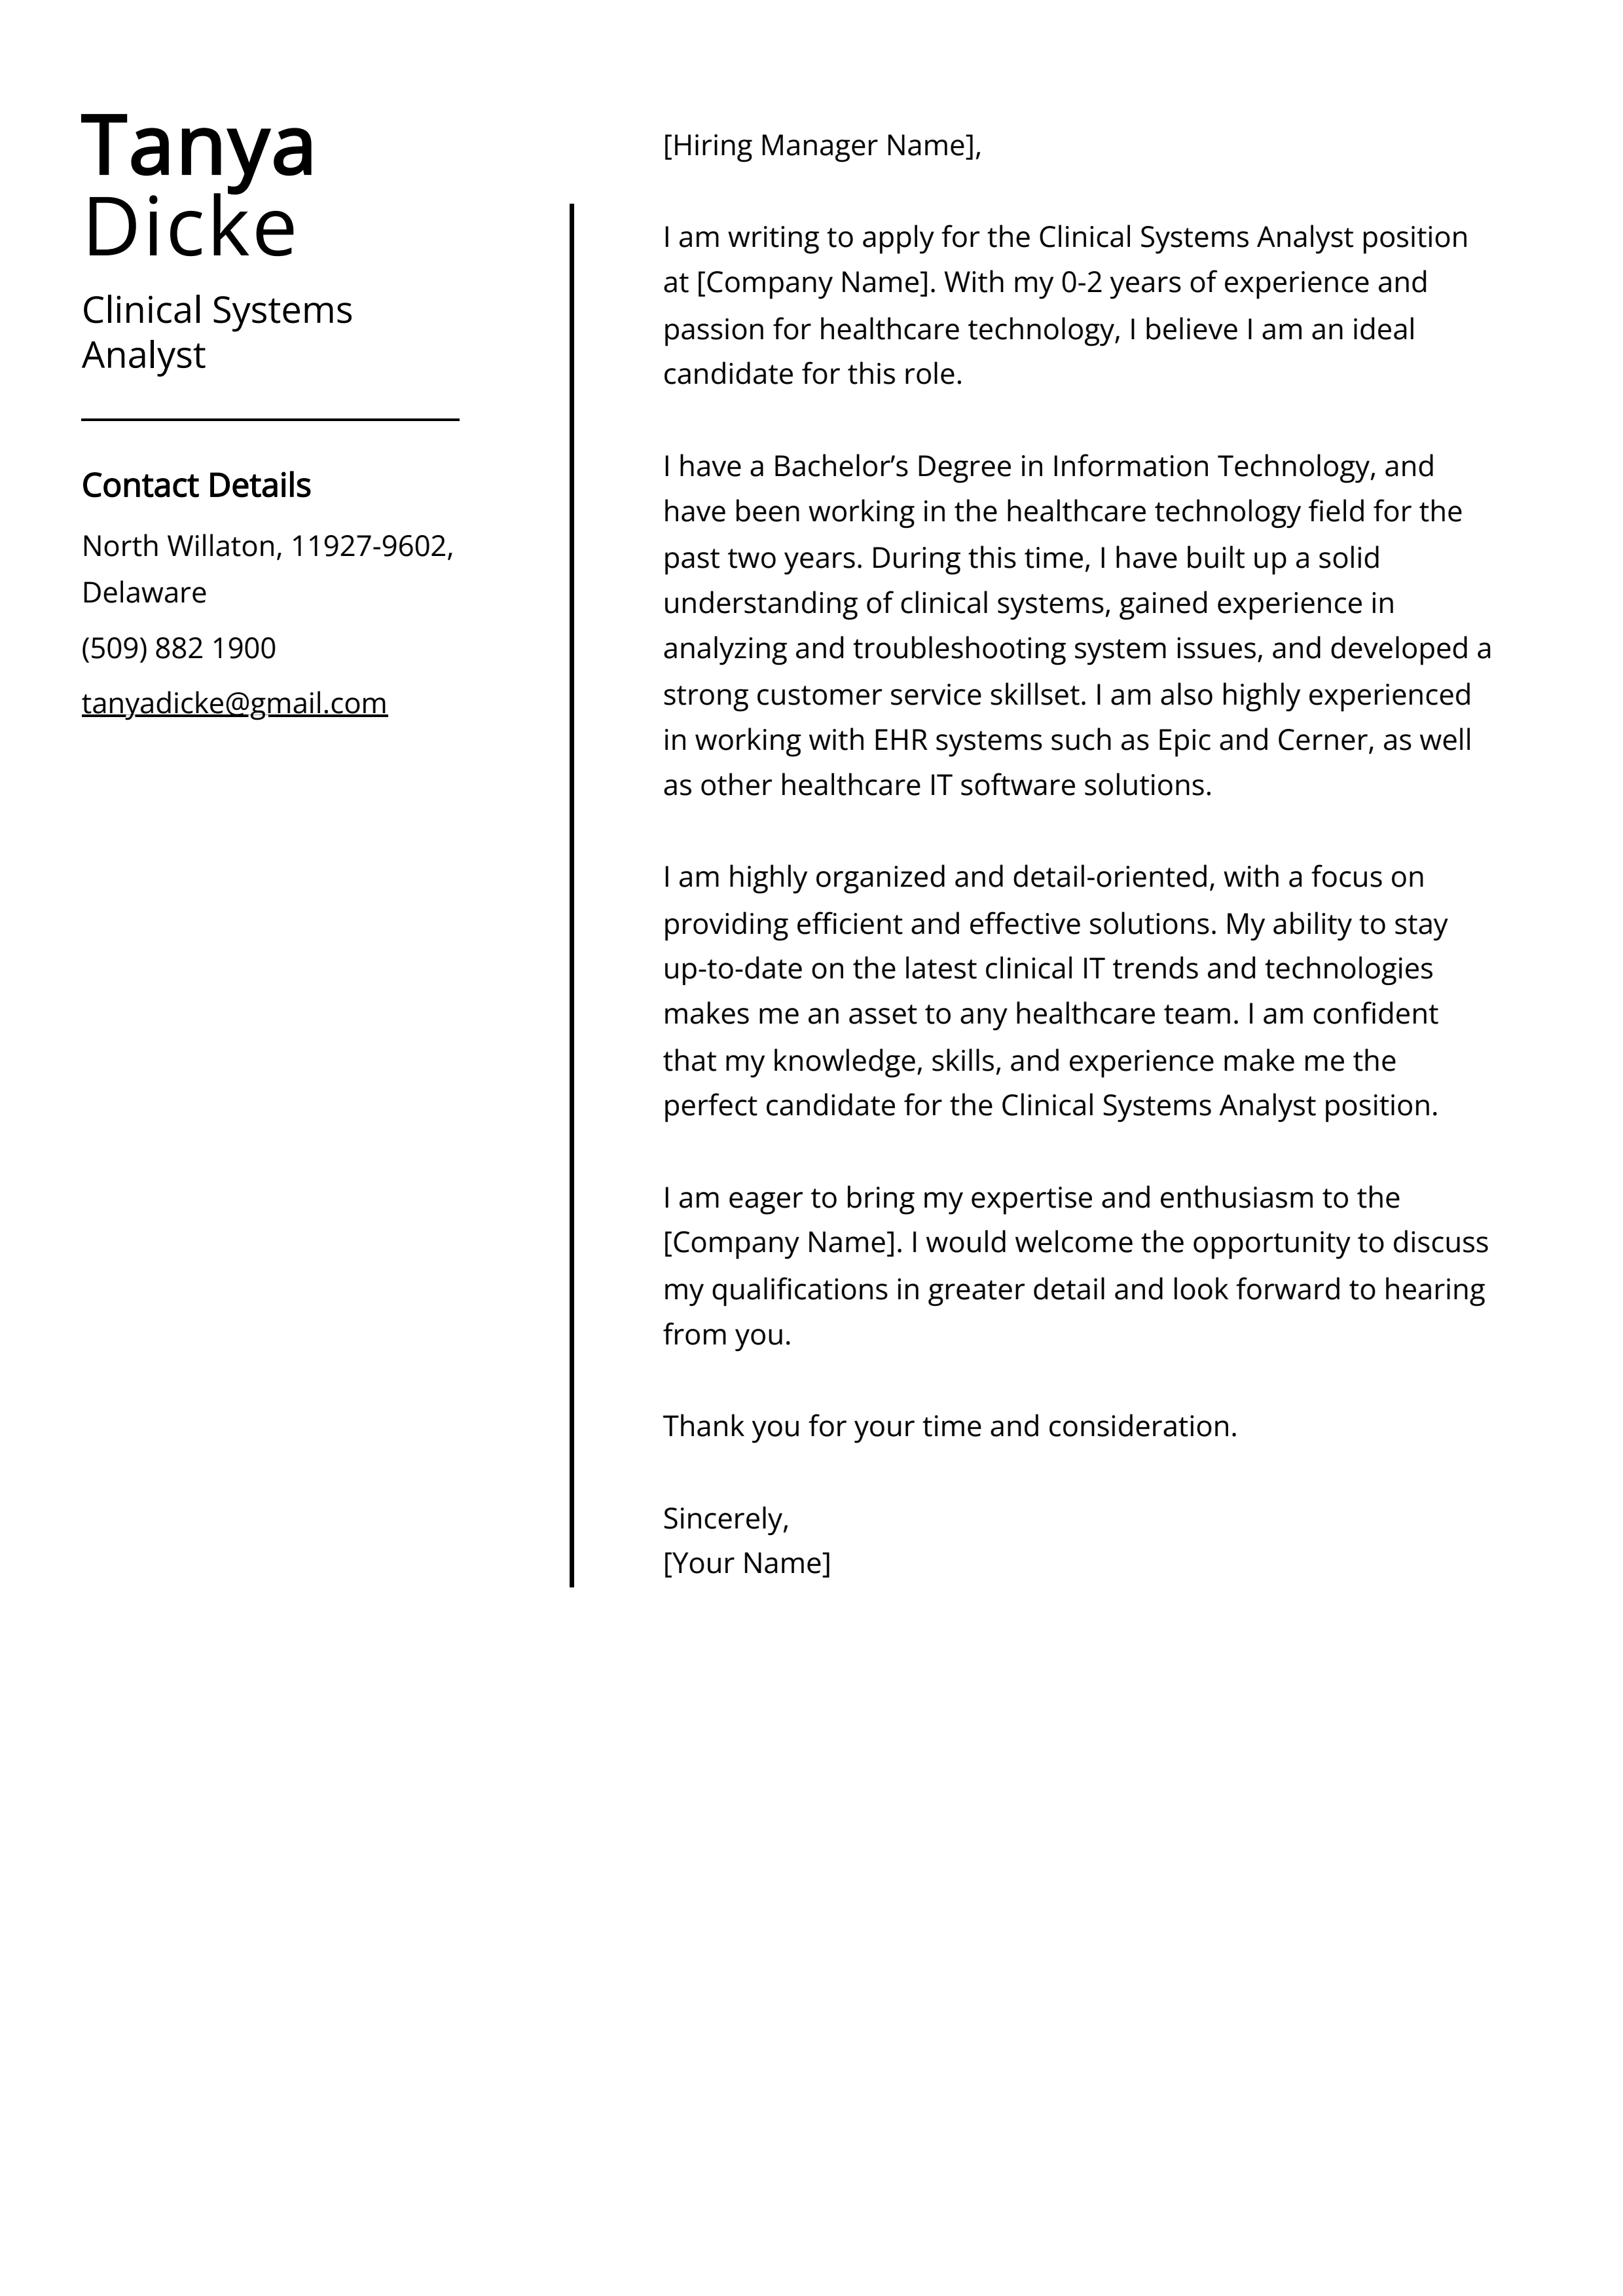 Clinical Systems Analyst Cover Letter Example